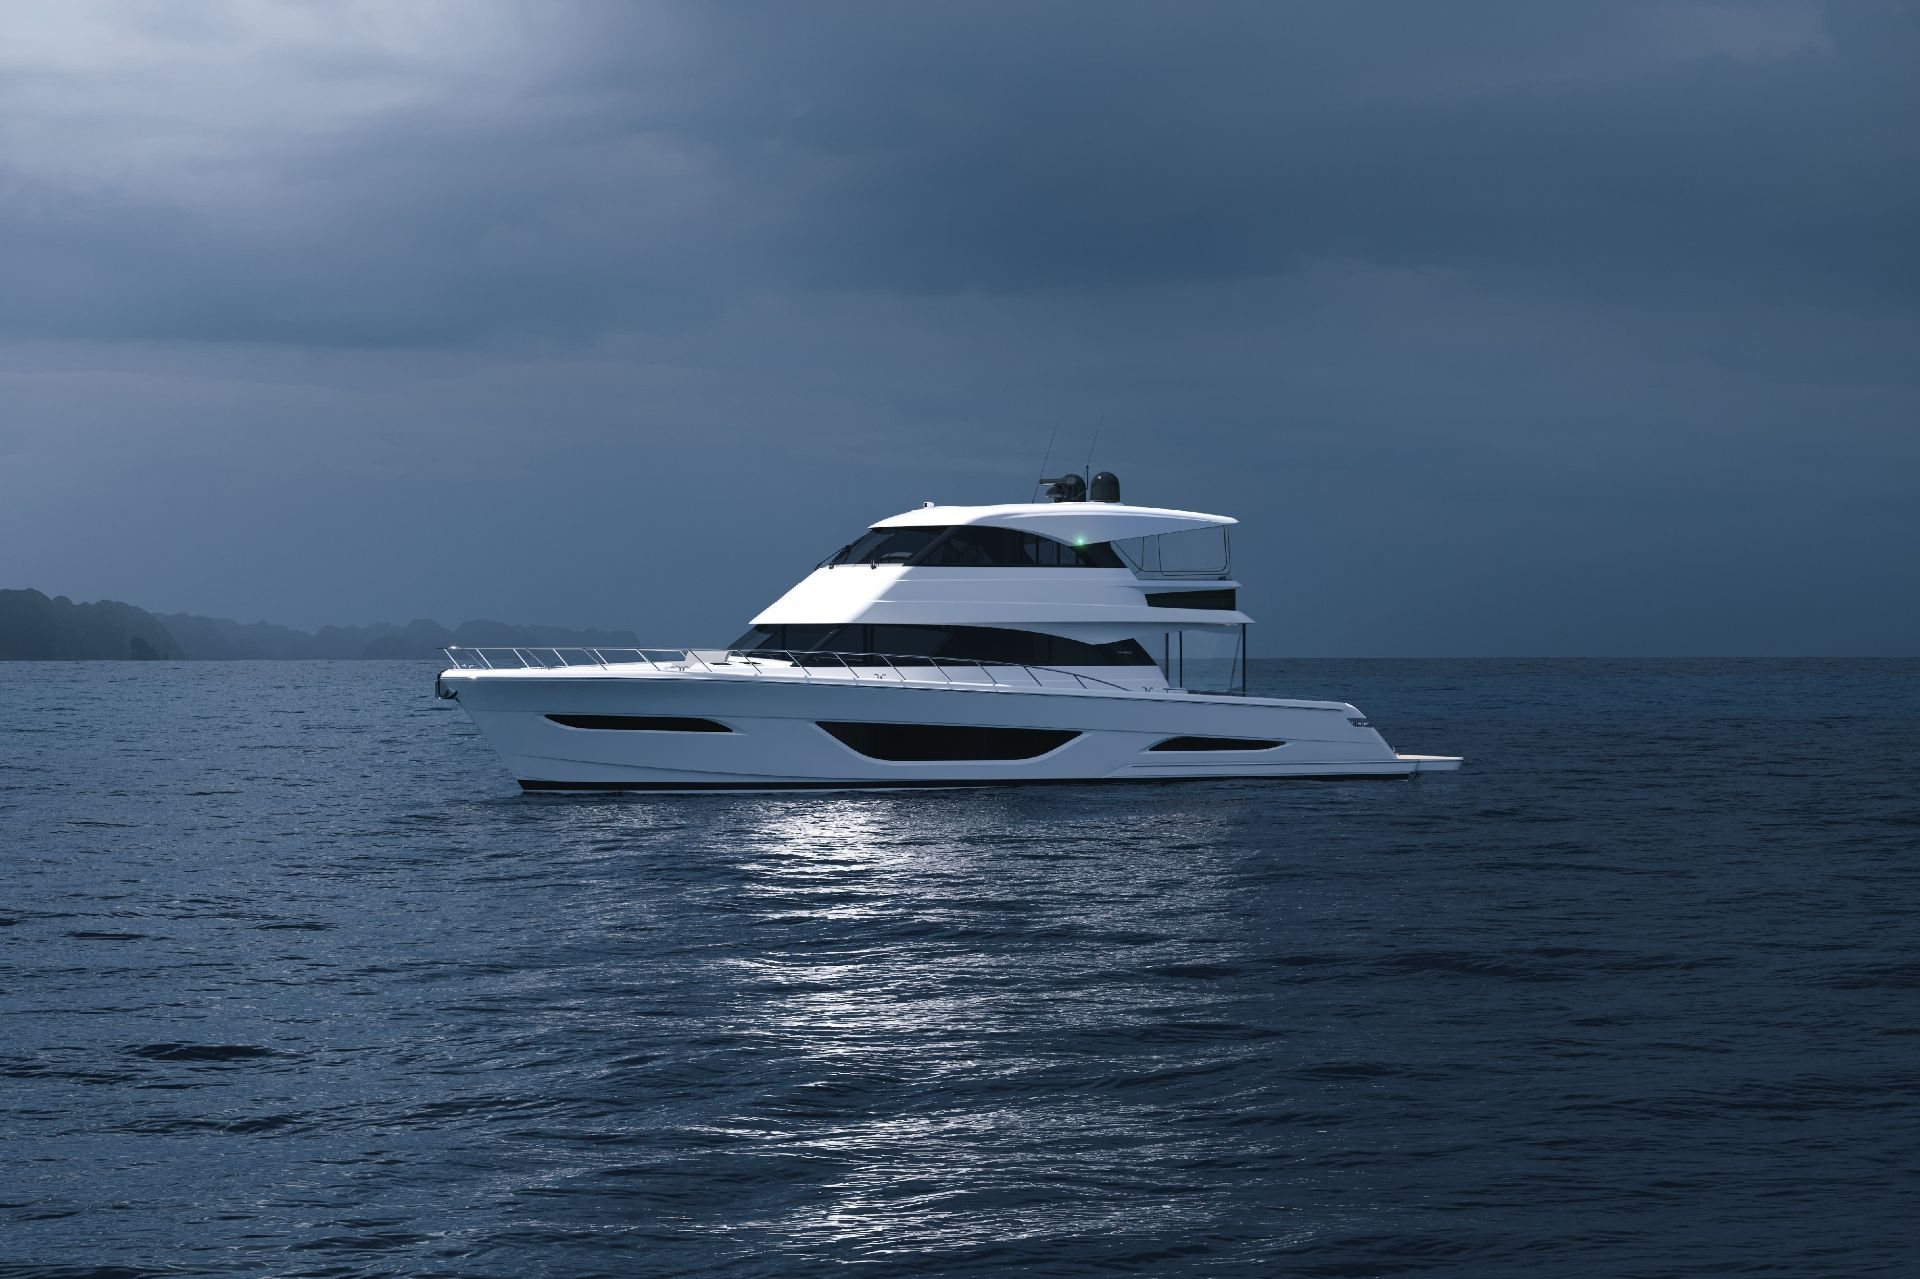 360 VR Virtual Tours of the Maritimo M75